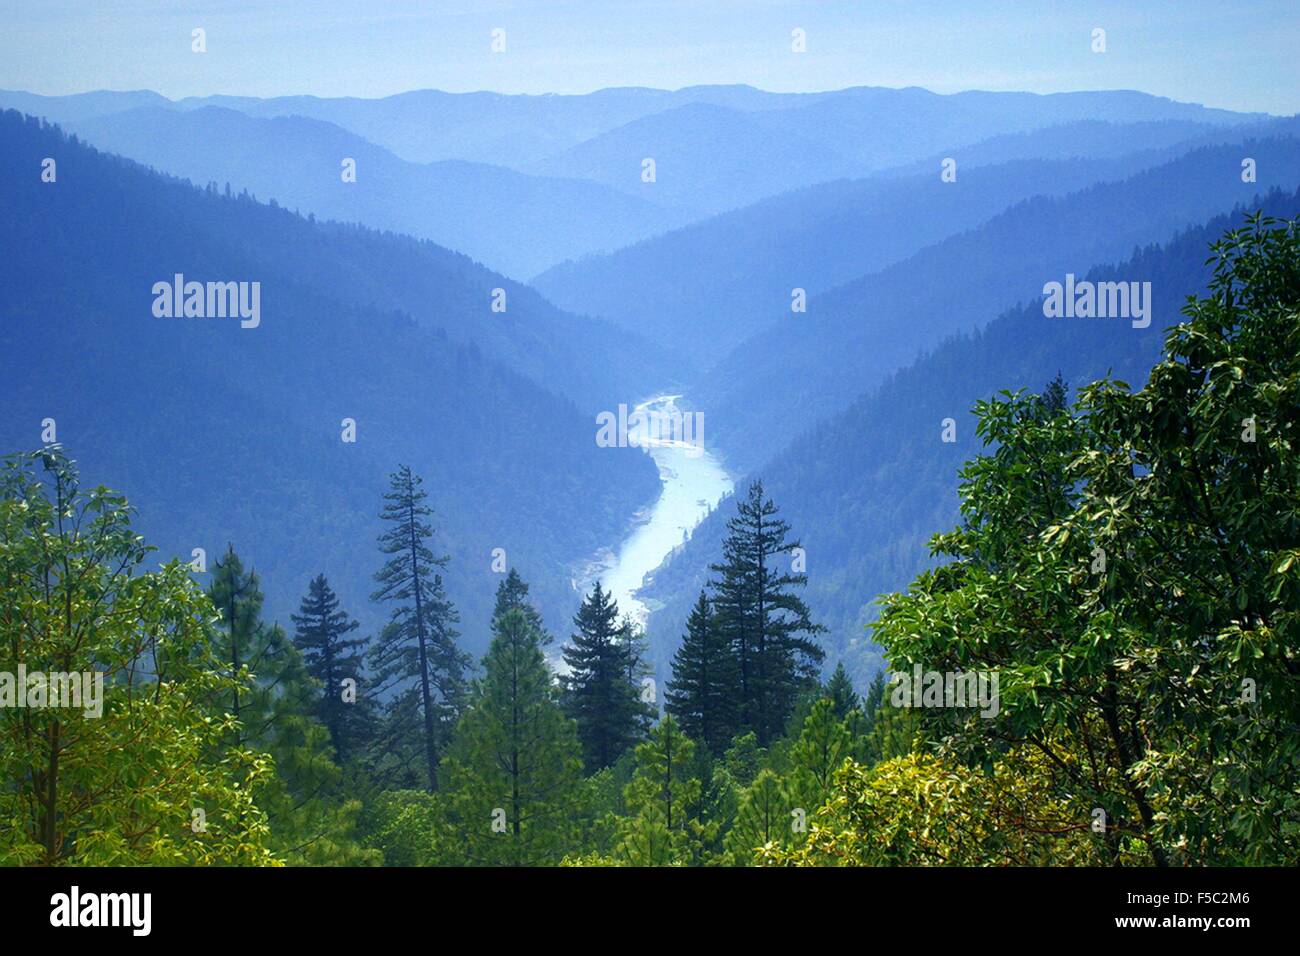 View of the Rogue River from Grave Creek to Foster Bar in the Klamath mountains of the Siskiyou National Forest May 17, 2015 near Medford, Oregon. Stock Photo